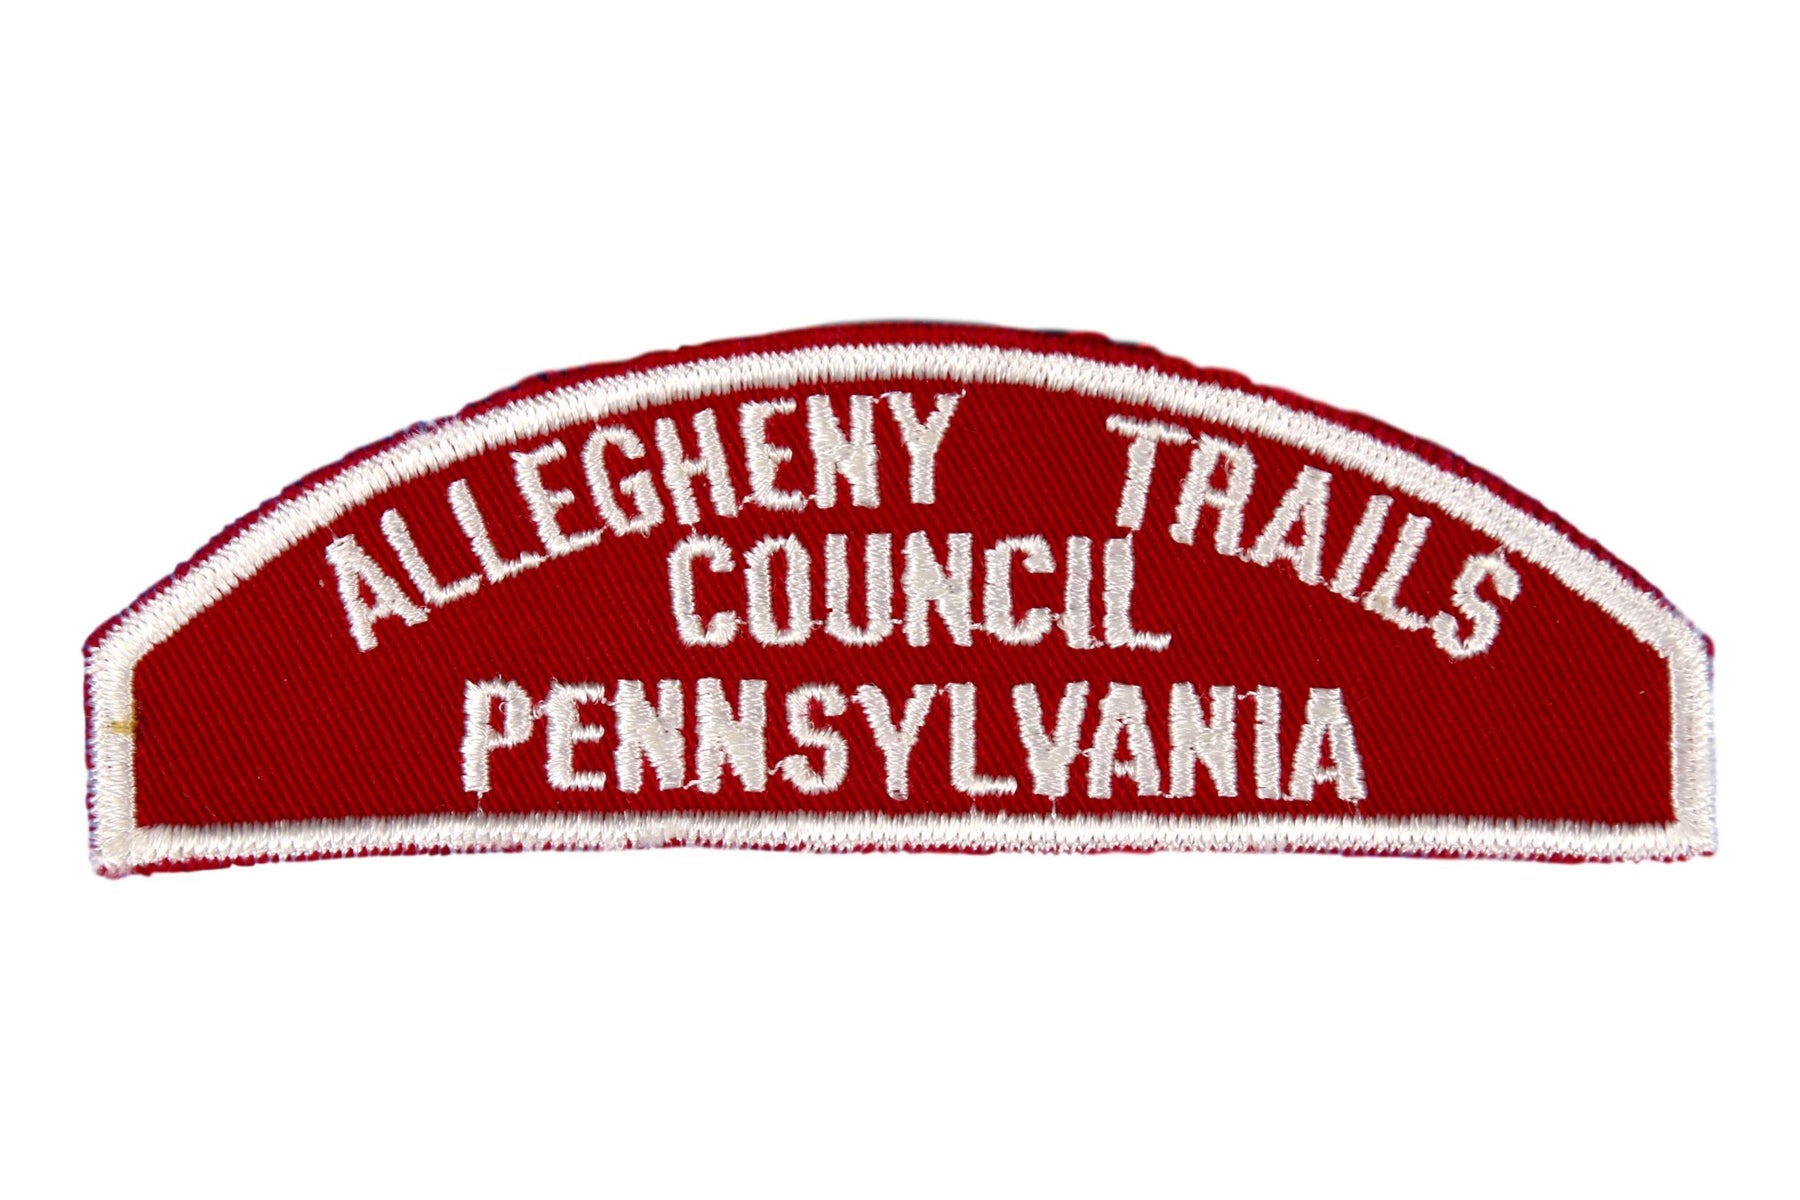 Allegheny Trails Red and White Council Strip